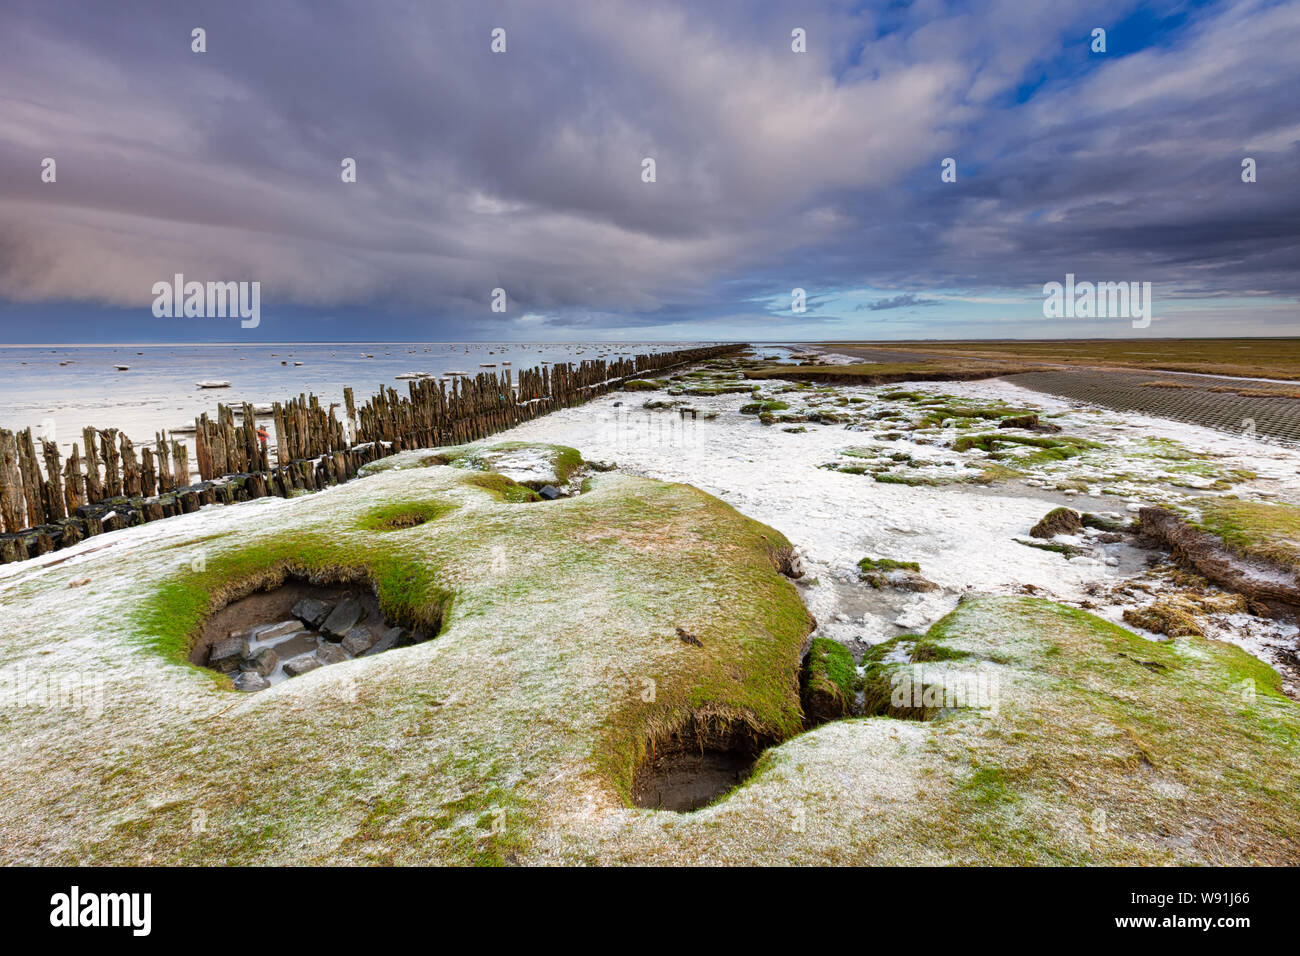 A winter landscape of the Waddensea in the Netherlands with dark clouds in the background and snow on the shore - Moddergat, The Netherlands Stock Photo